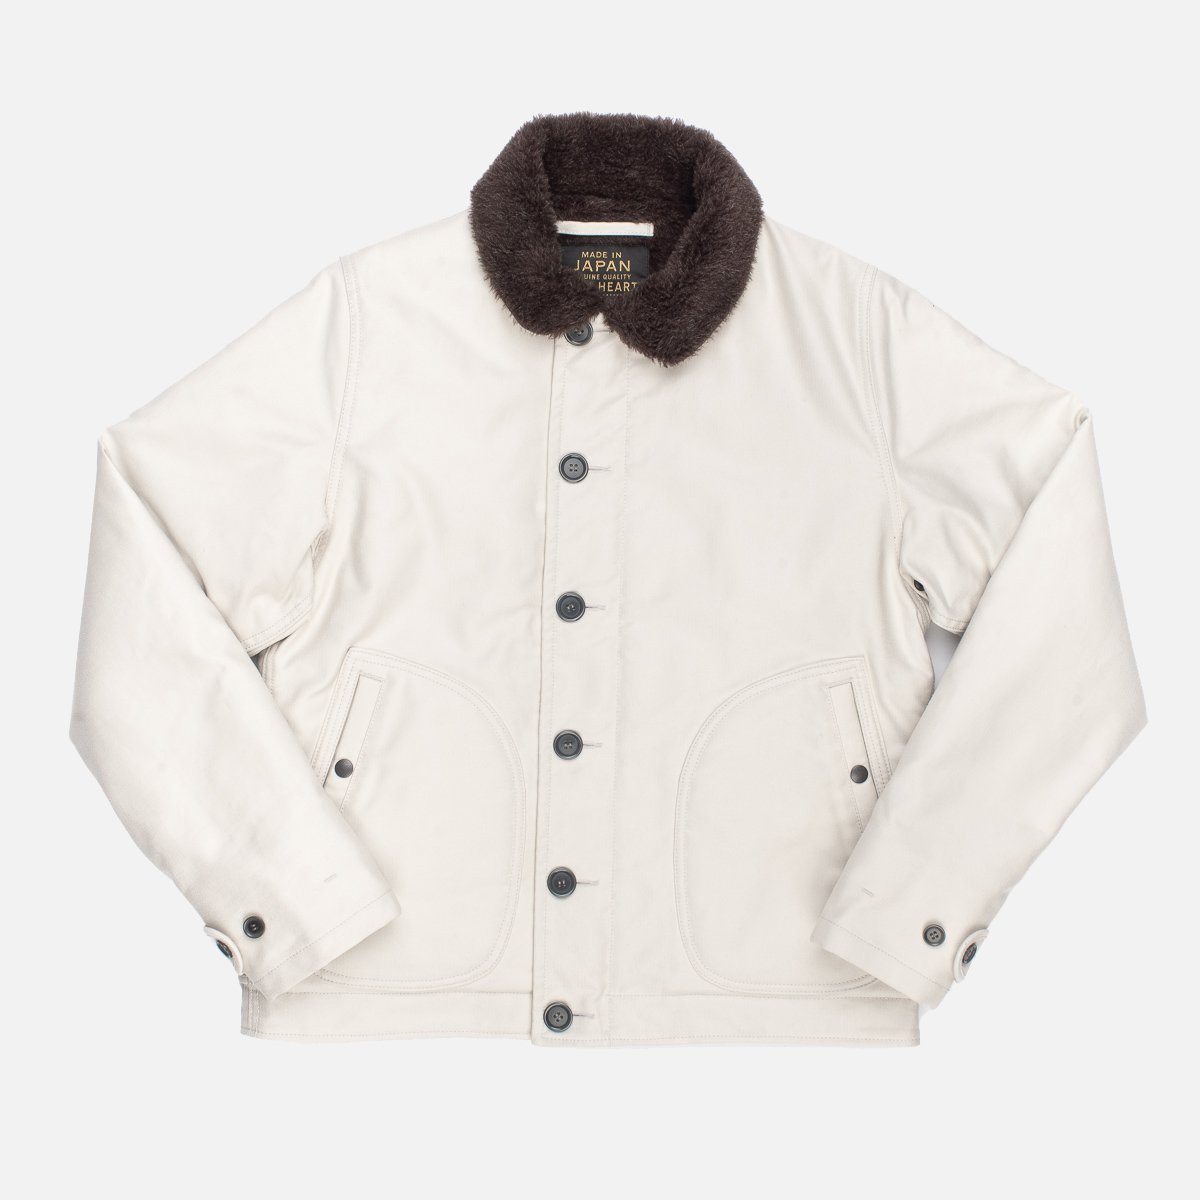 Iron Heart Whipcord N1 Deck Jacket - Ivory